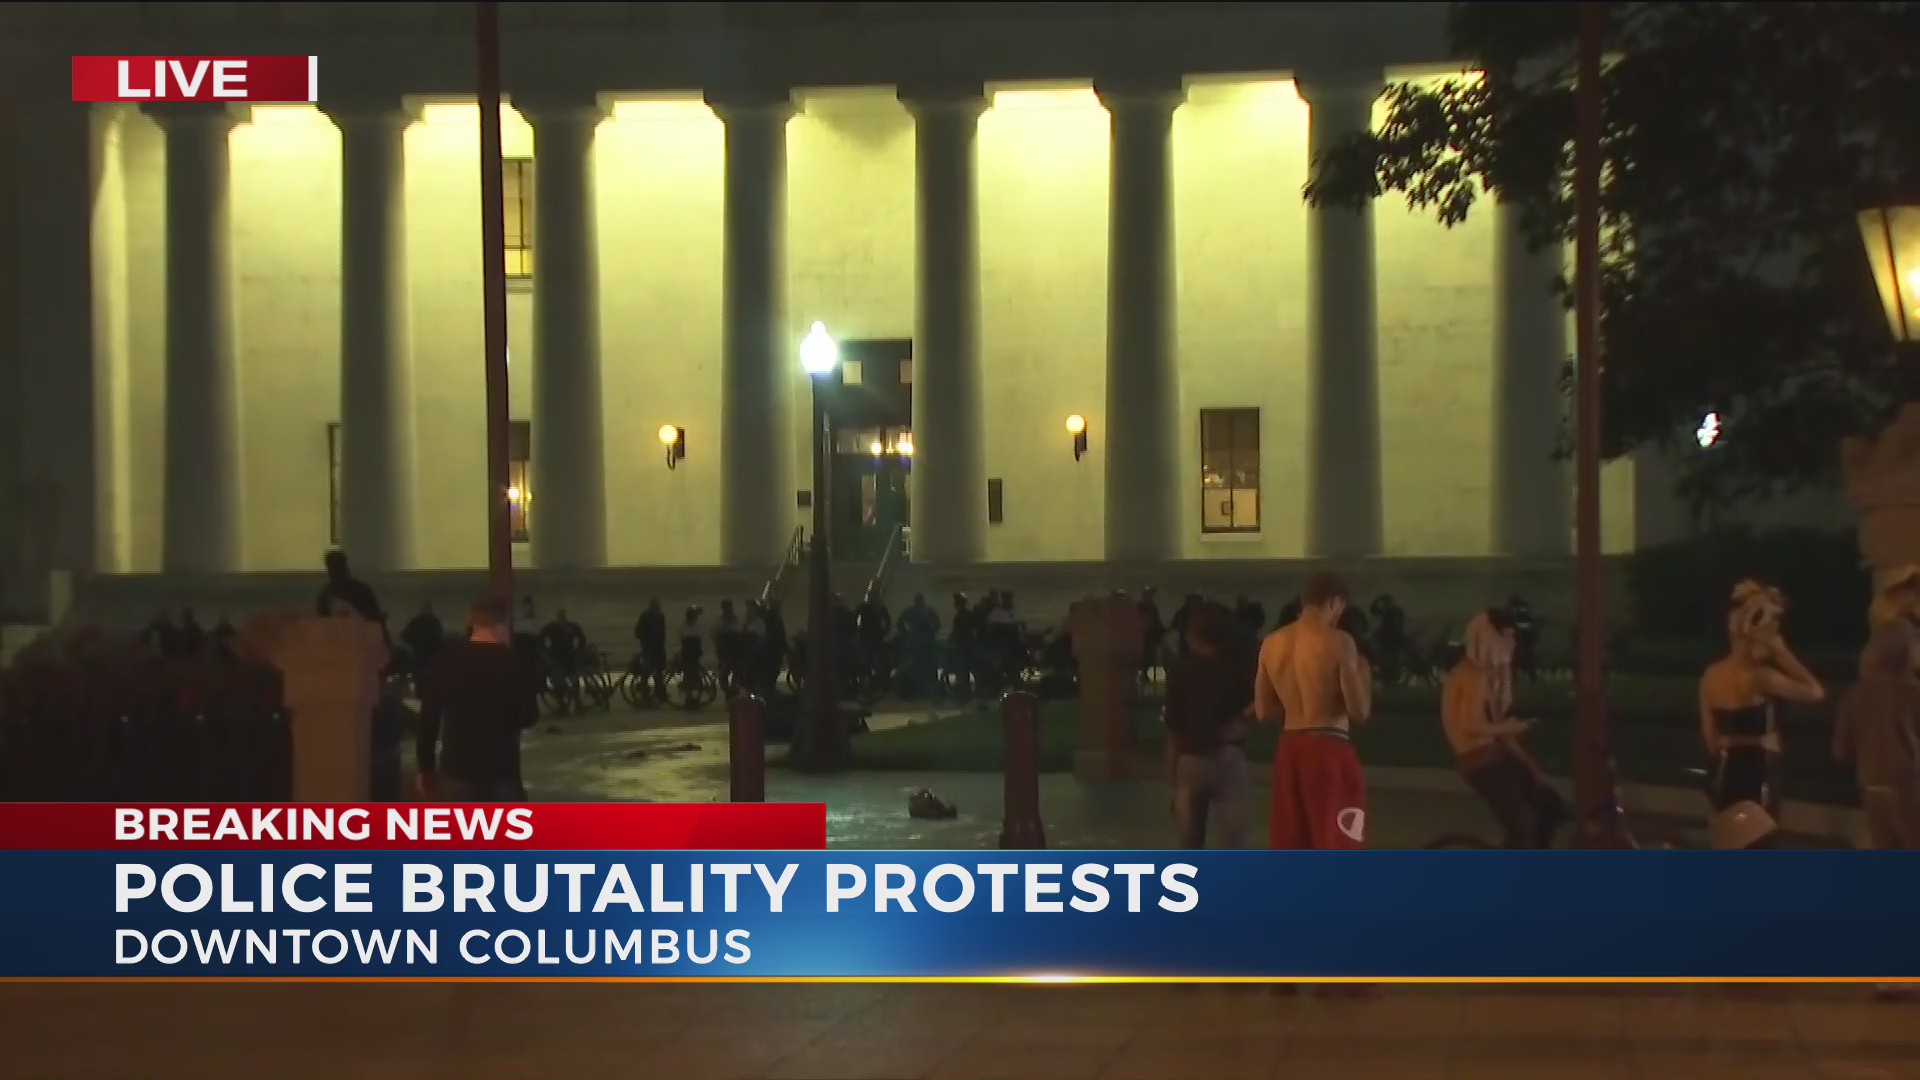 Thumbnail for the video titled "Columbus protest update 12:00 a.m. cut in"